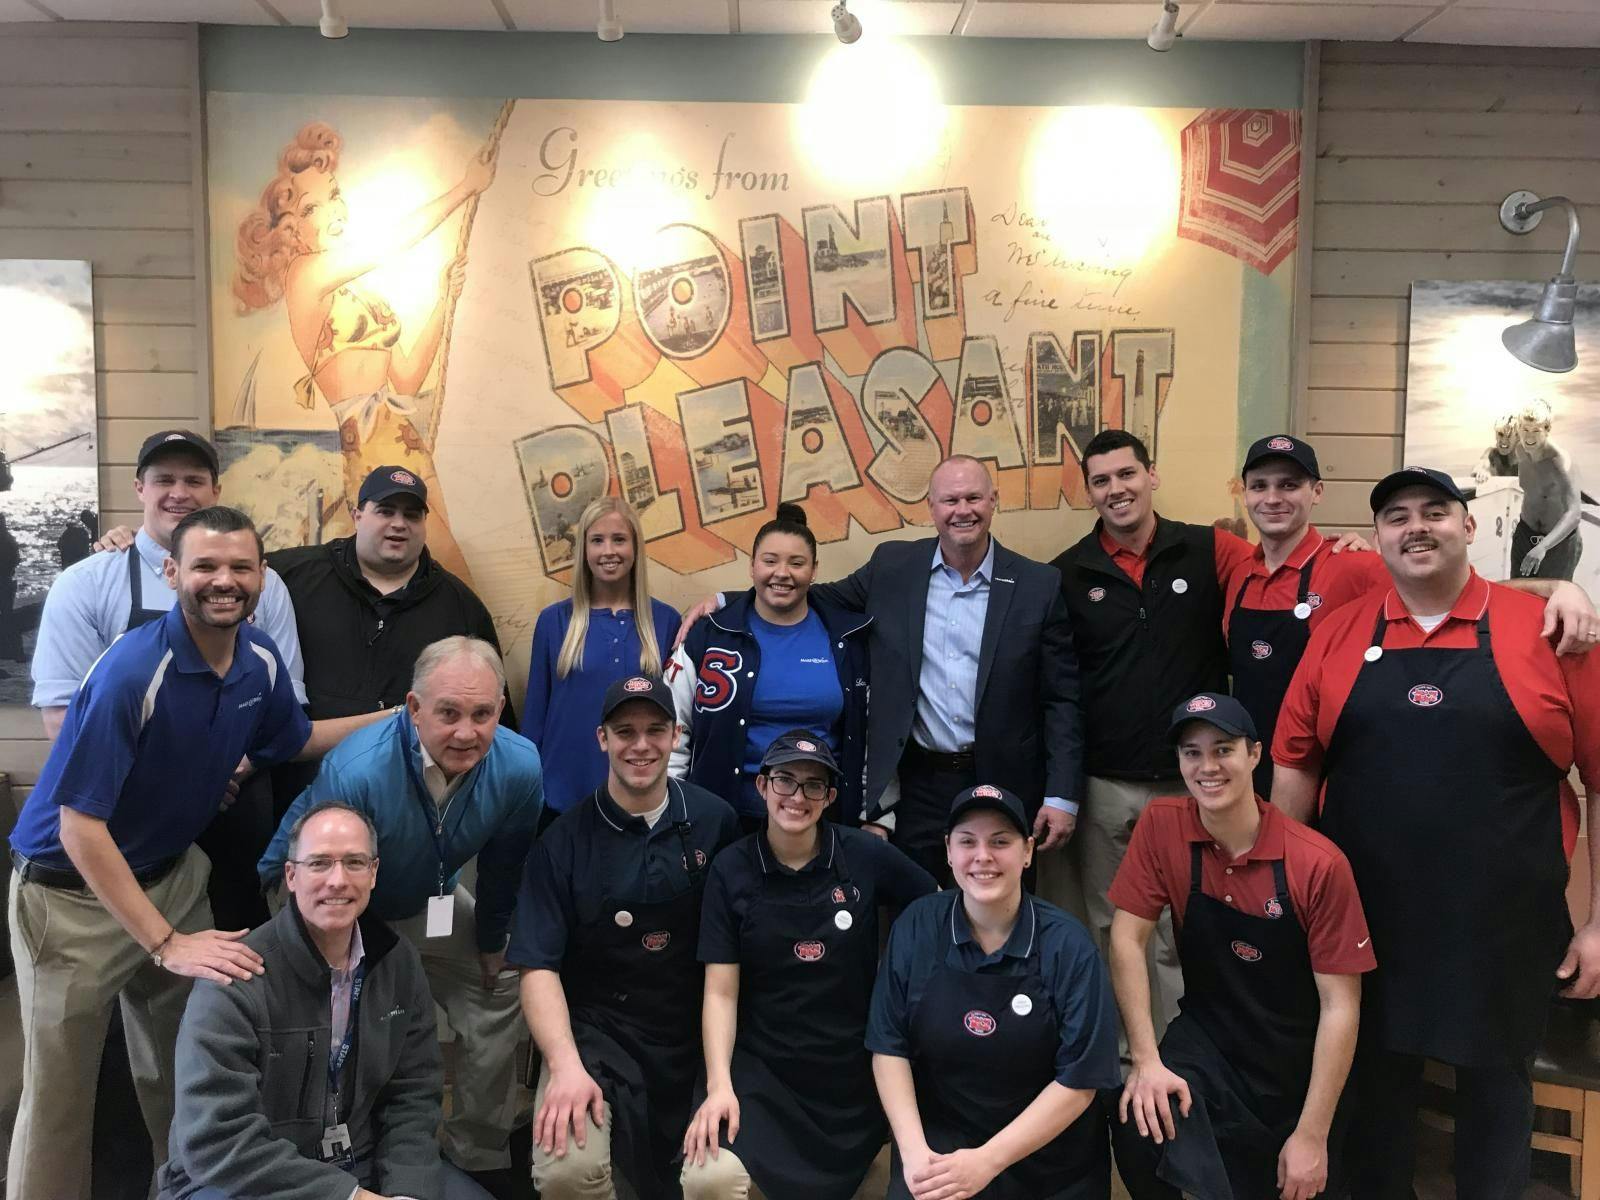 Jersey Mike Subs Raises $377,000 for Make-A-Wish New Jersey